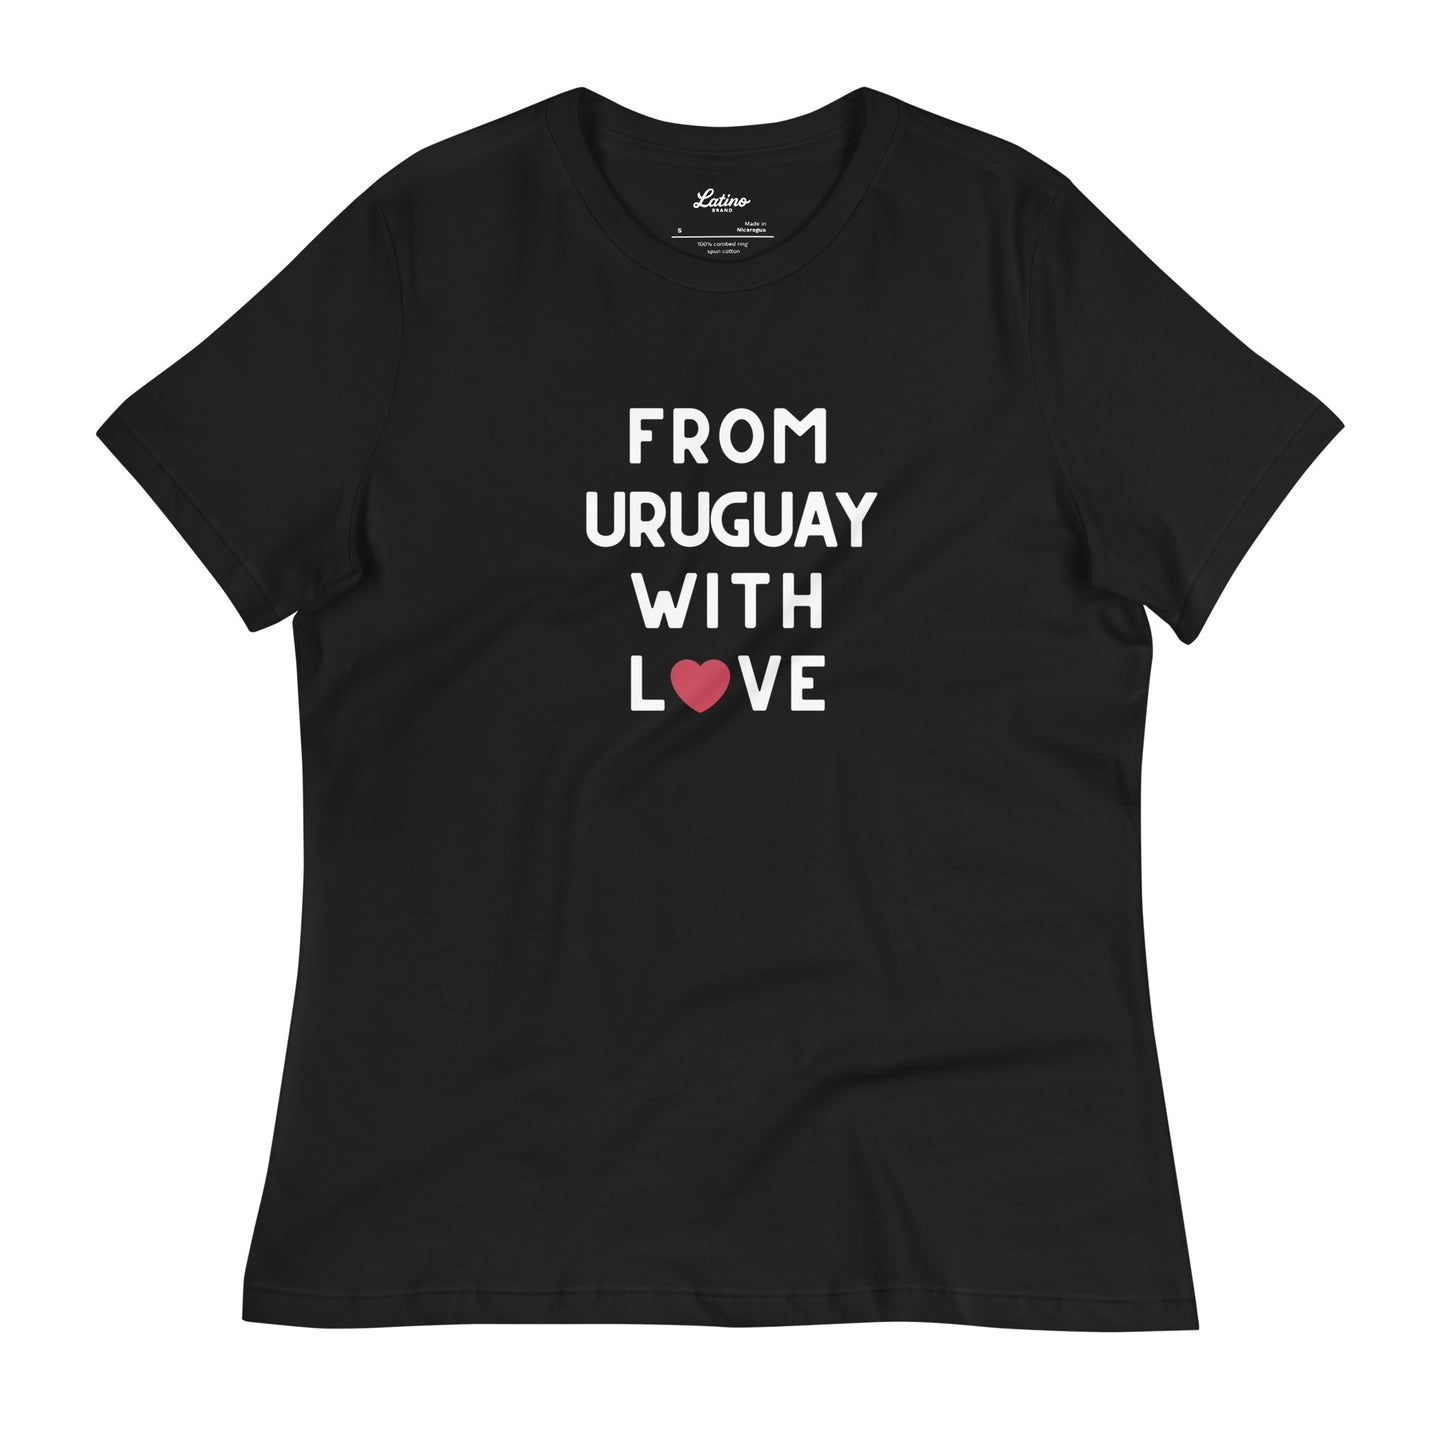 🇺🇾 From Uruguay With Love (Women)